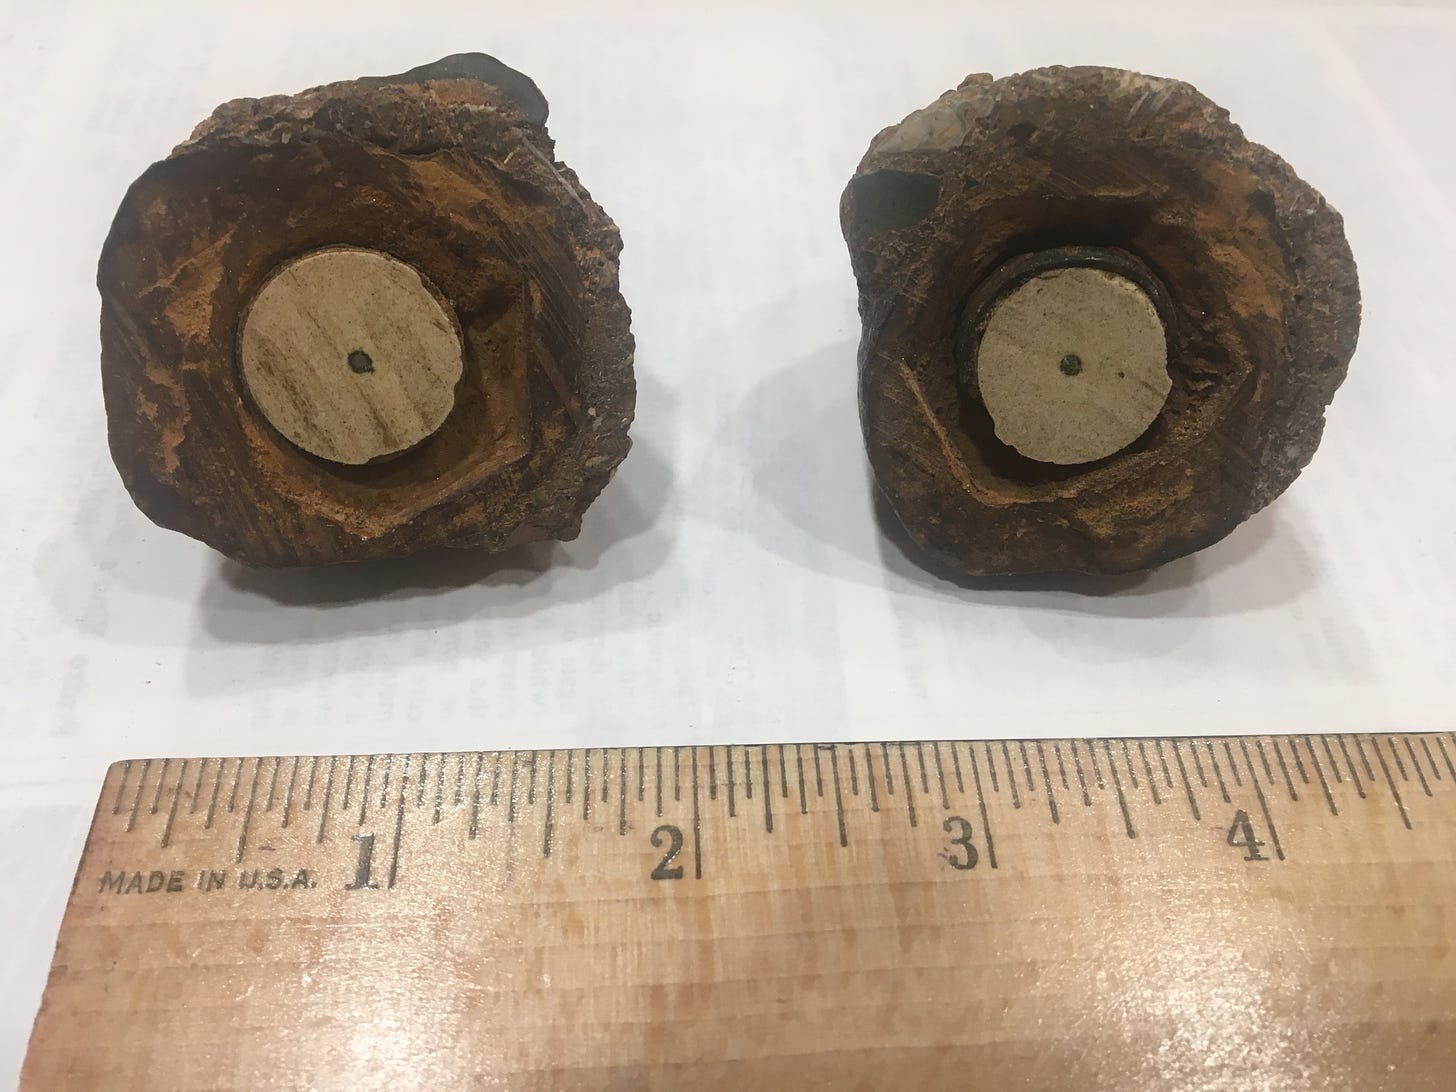 A photo of what appears to be two stones, or one larger stone cut in half. The halves reveal something circular inside the stone, while a ruler laid in front suggests the total width of both across is approximately four inches